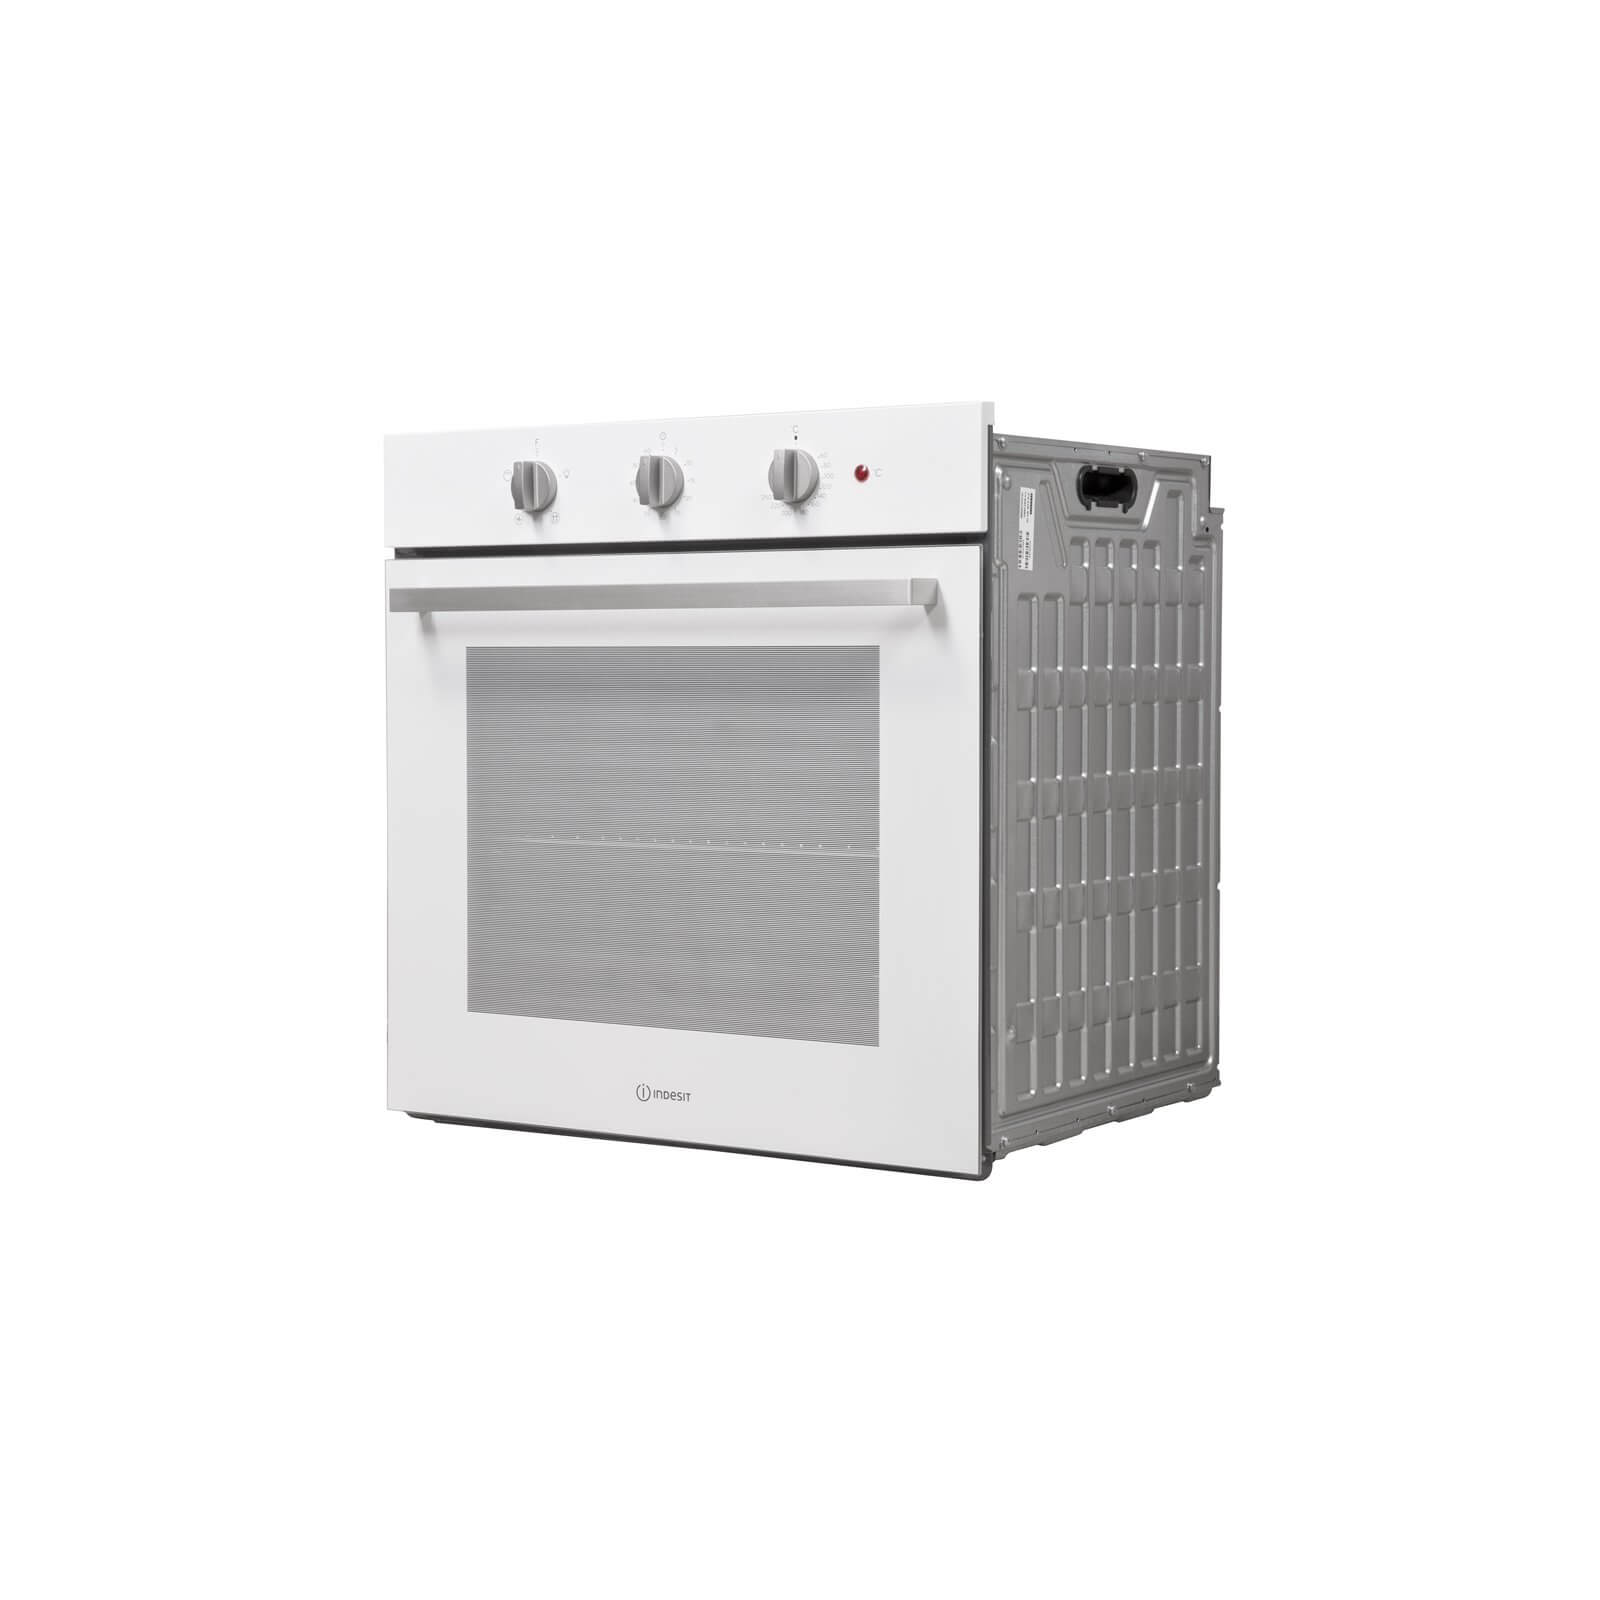 Indesit Aria IFW 6330 WH Built-in Electric Oven - White